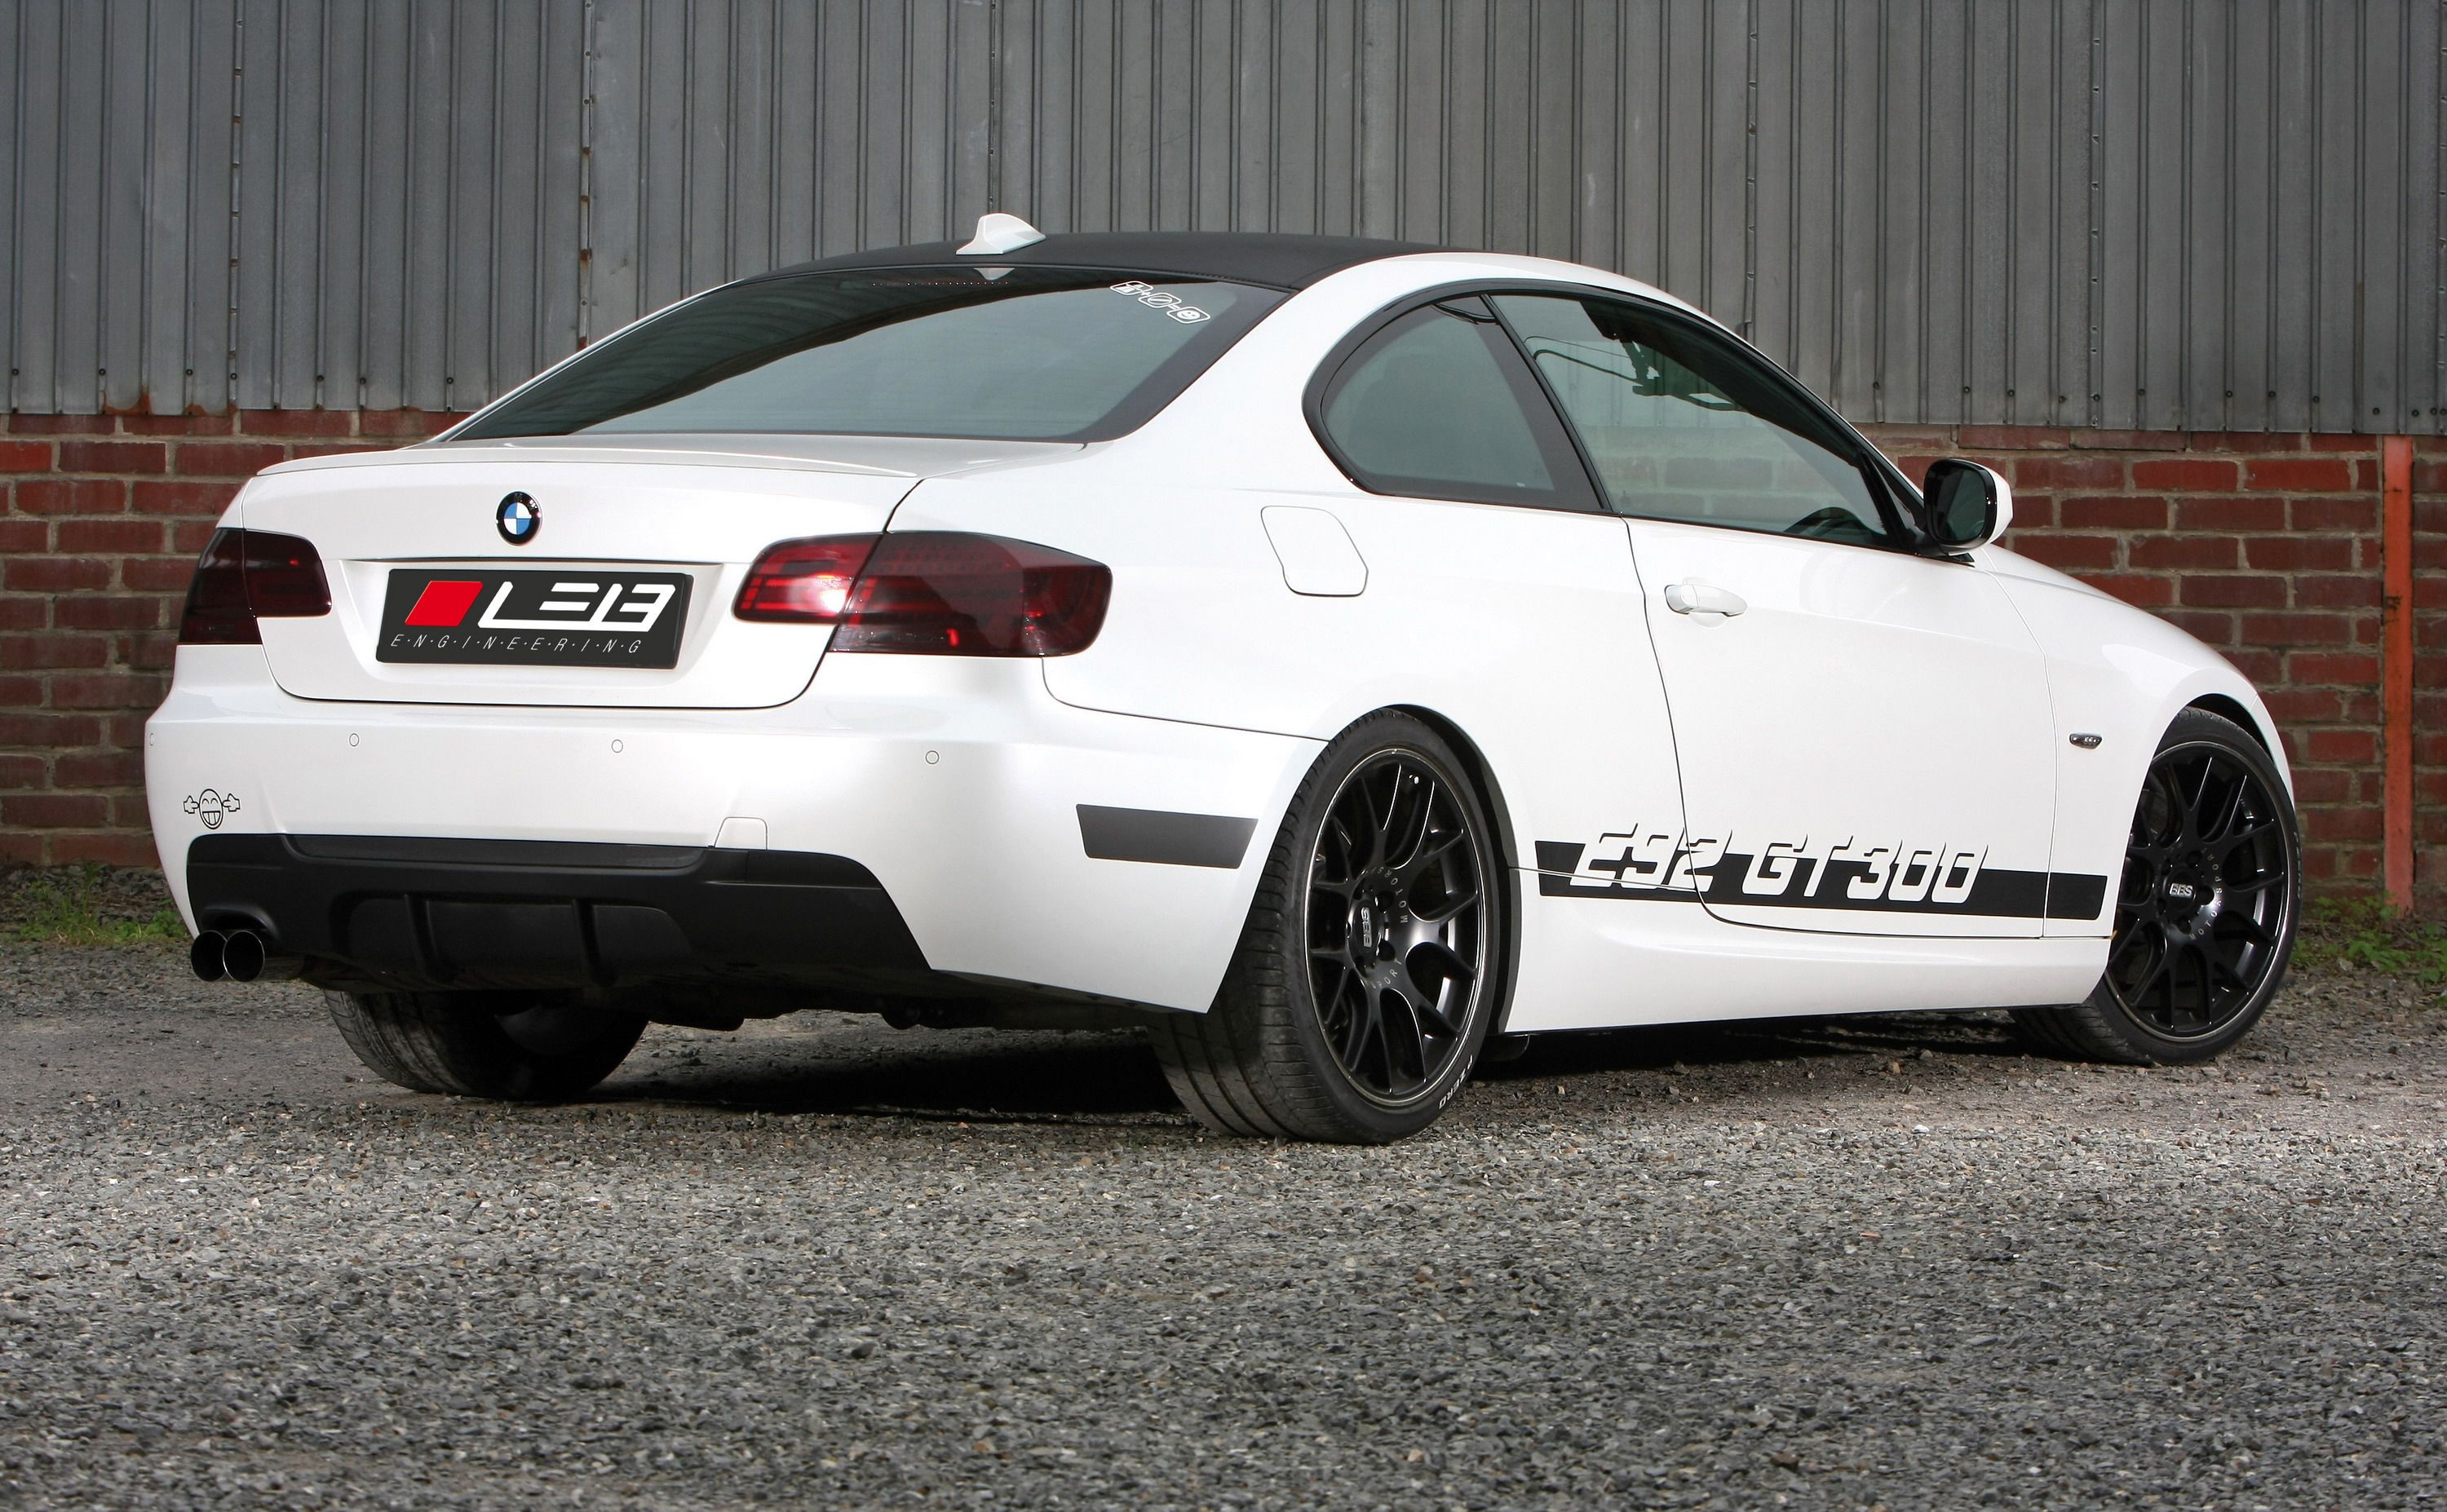 2013 BMW 3-Series by Leib Engineering